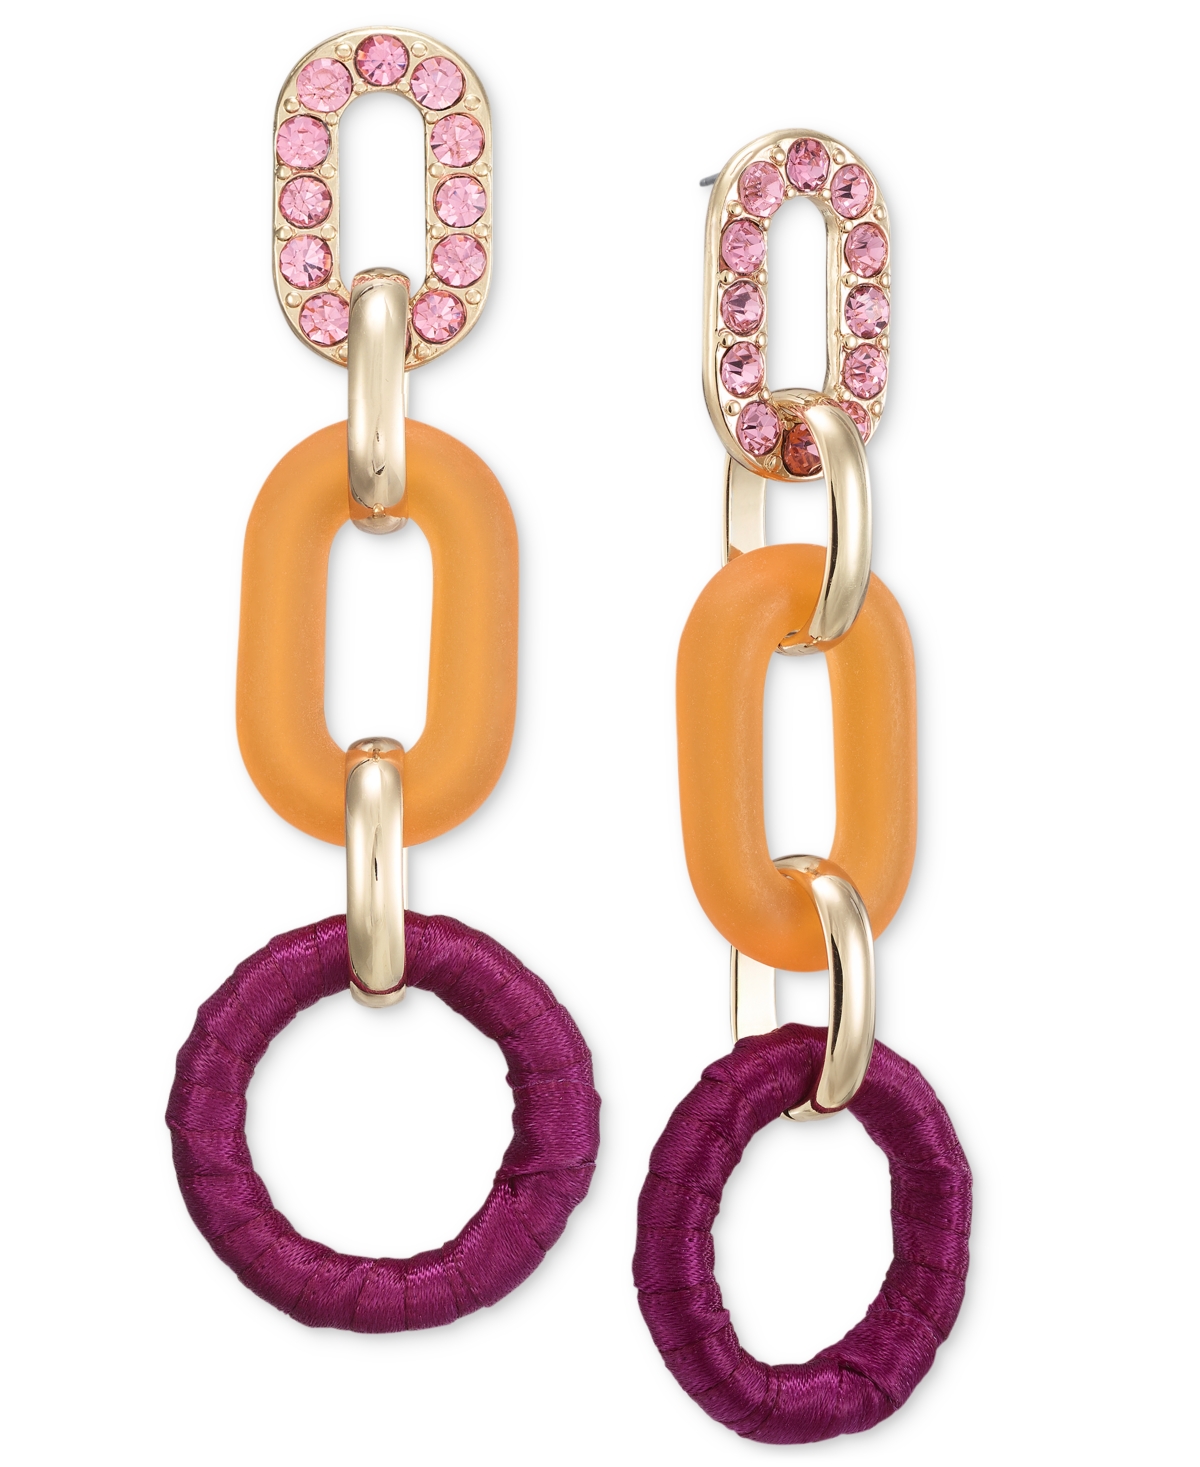 Gold-Tone Pave, Color & Ribbon-Wrapped Chain Link Statement Earrings, Created for Macy's - Pink